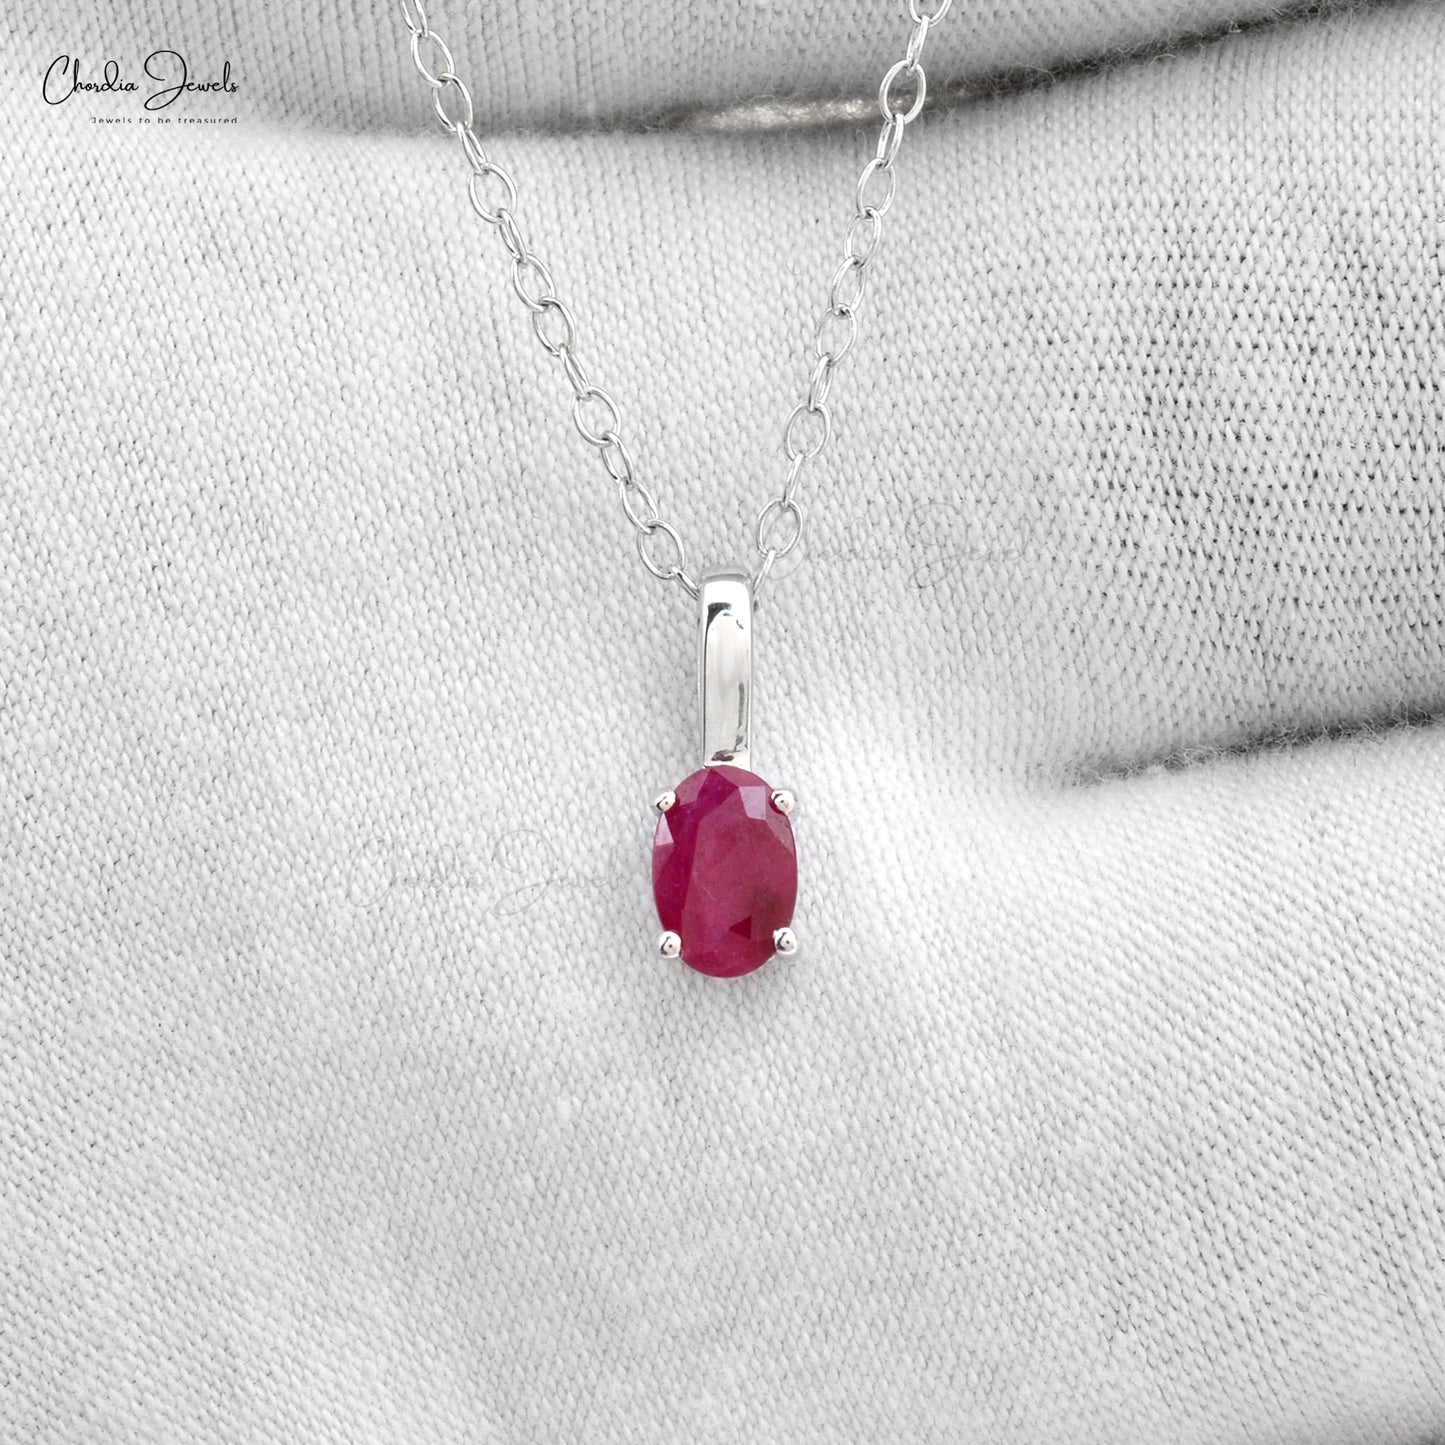 Load image into Gallery viewer, Pure 14k White Gold Female Elegant Oval Shape Natural Red Ruby Gemstone Pendant Necklace Gift For Bridal Beautiful Jewelry
